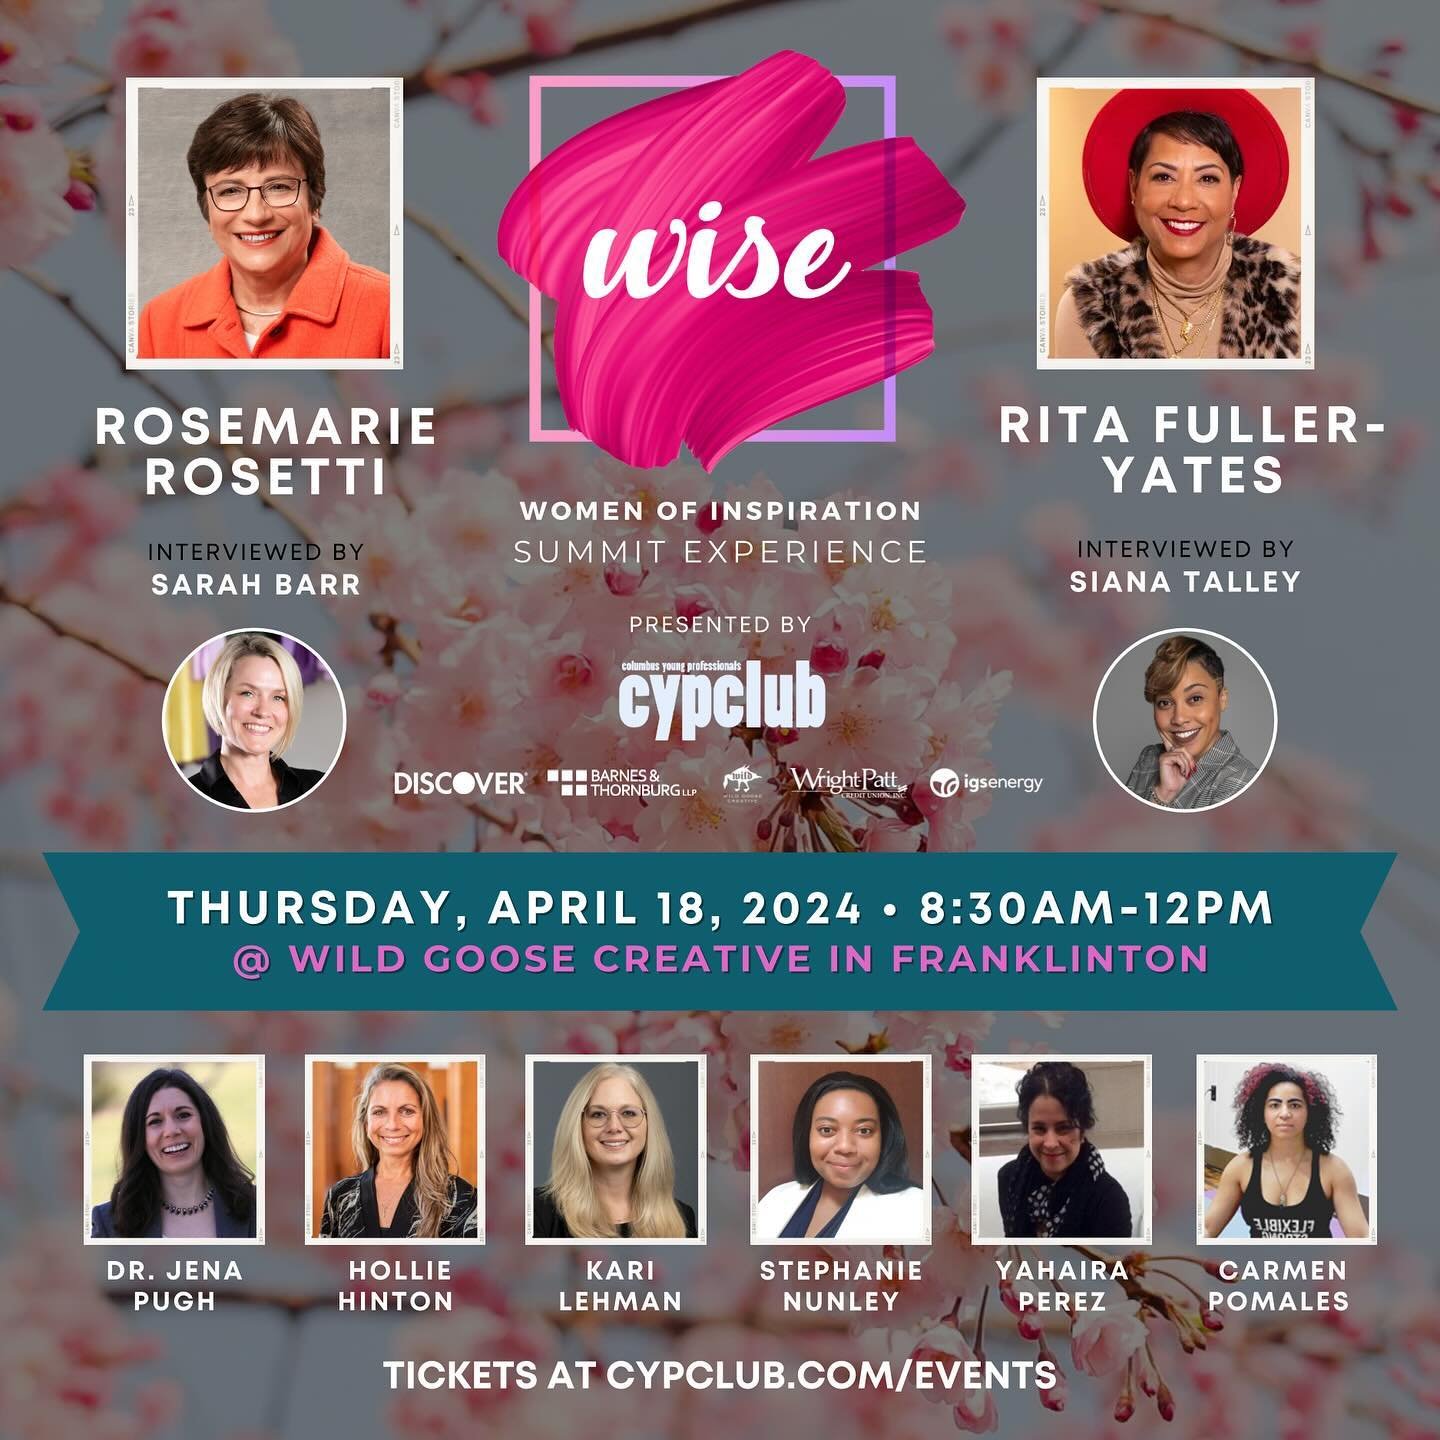 On Thursday, we&rsquo;re back with another edition of our Women of Inspiration Summit Experience (WISE)!! Our theme is &ldquo;Empowerment&rdquo; and here&rsquo;s the full lineup of speakers &amp; panelists for April 18th from 8:30am-12pm at @WildGoos